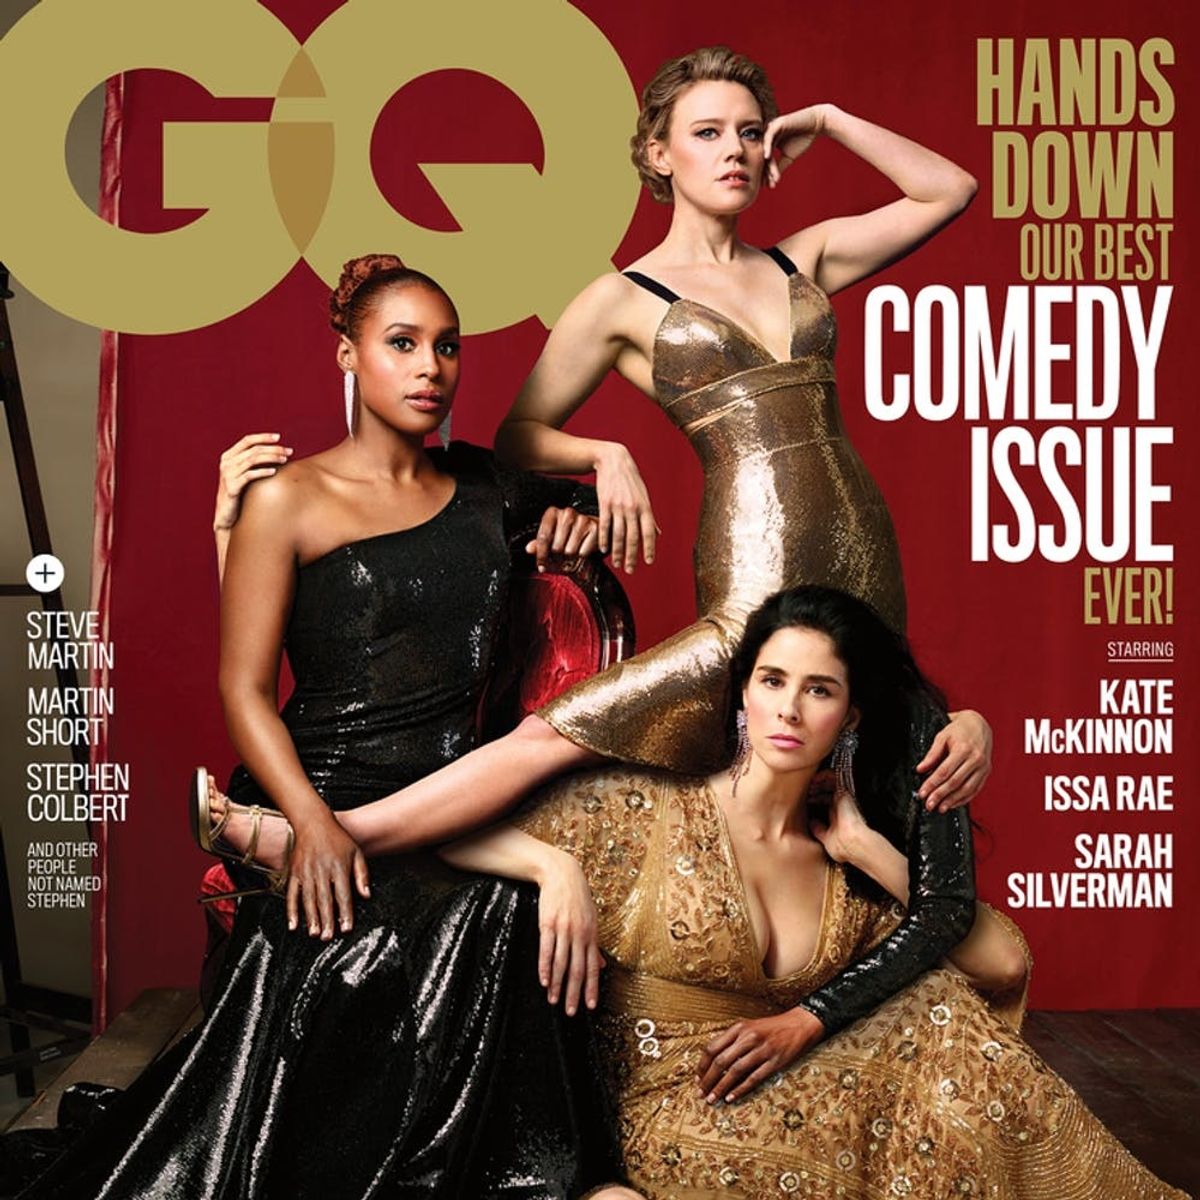 GQ’s 2018 Comedy Issue Cover Hilariously Spoofs Vanity Fair’s Extra-Arm Photoshop Fail